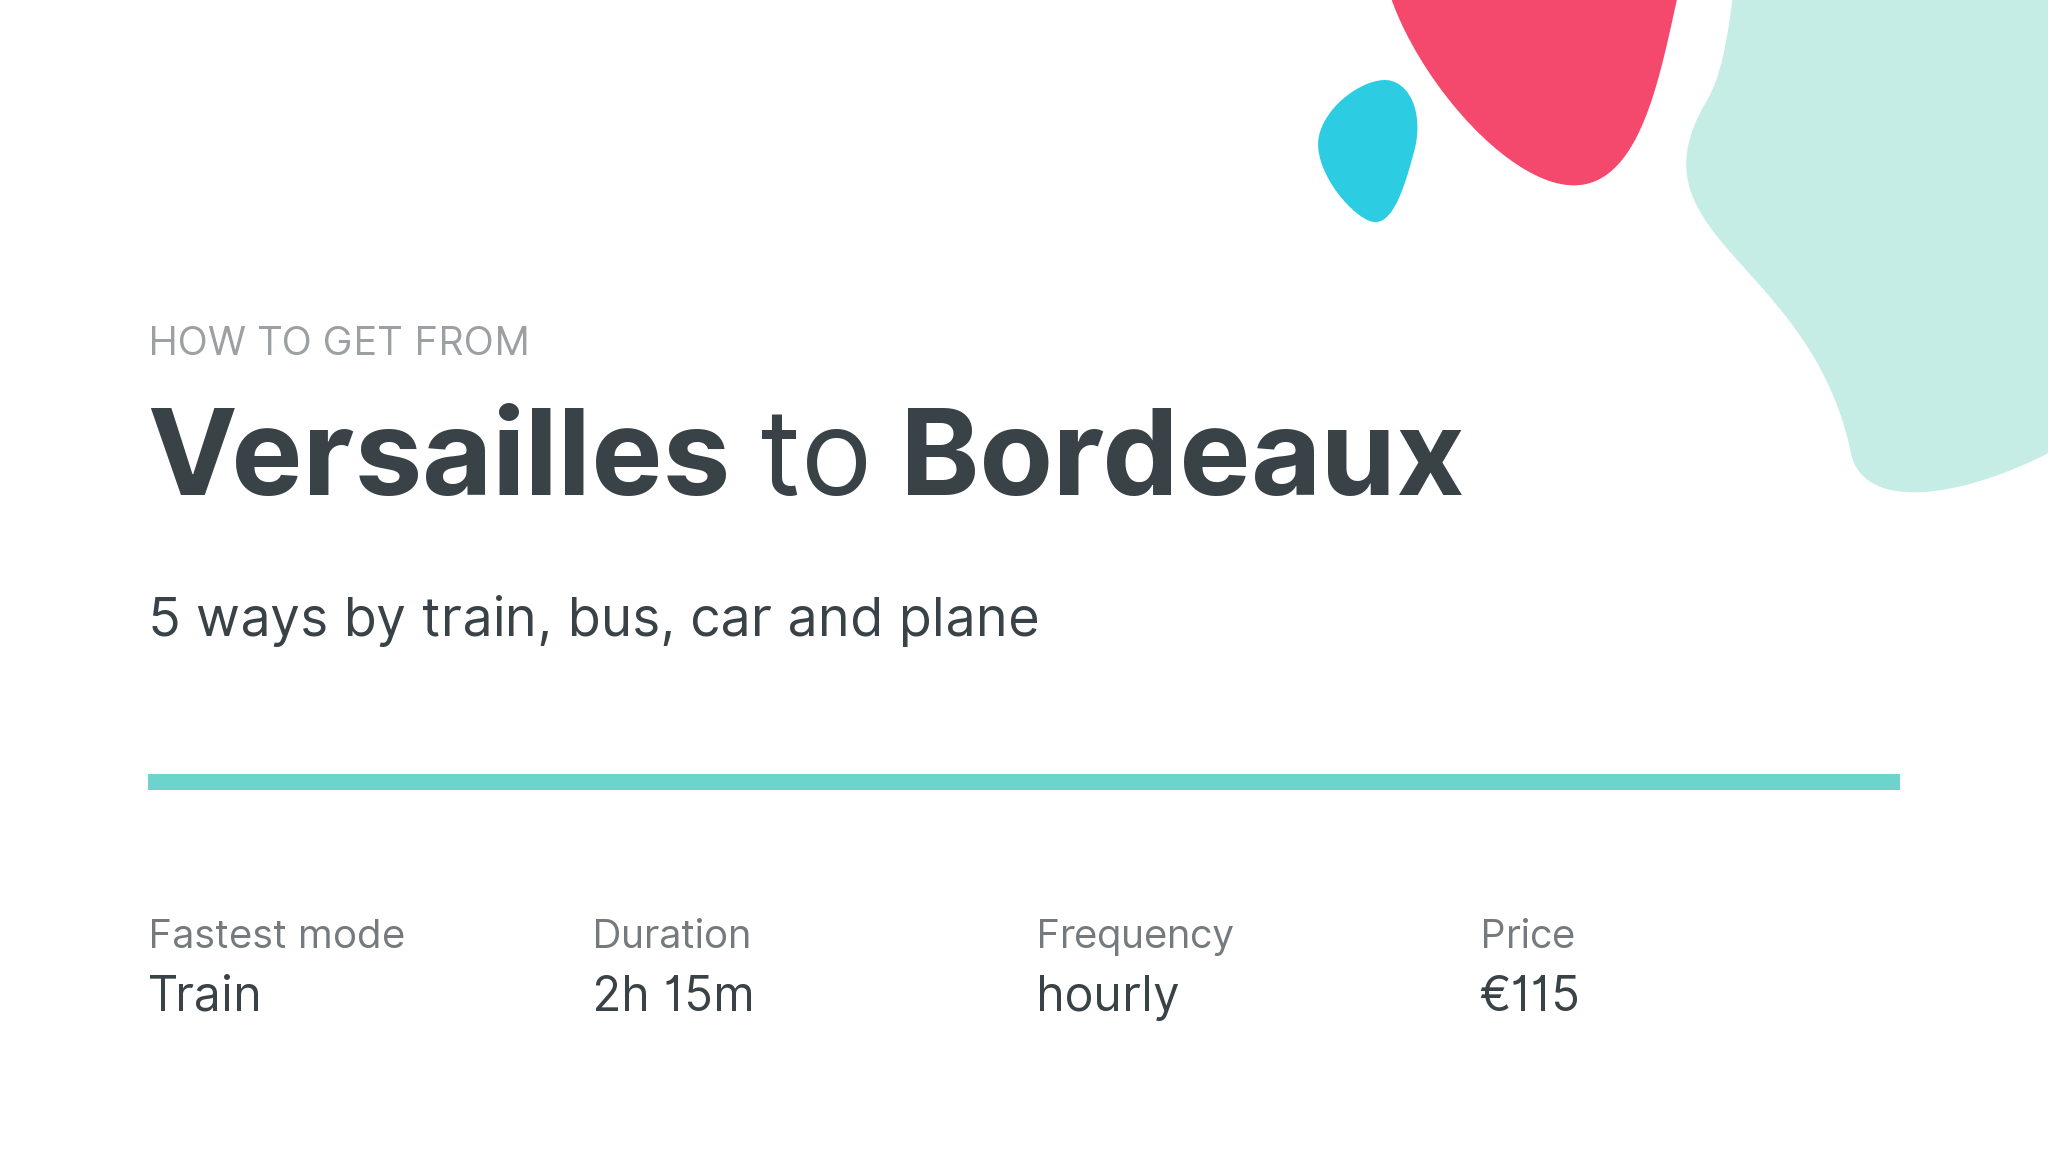 How do I get from Versailles to Bordeaux